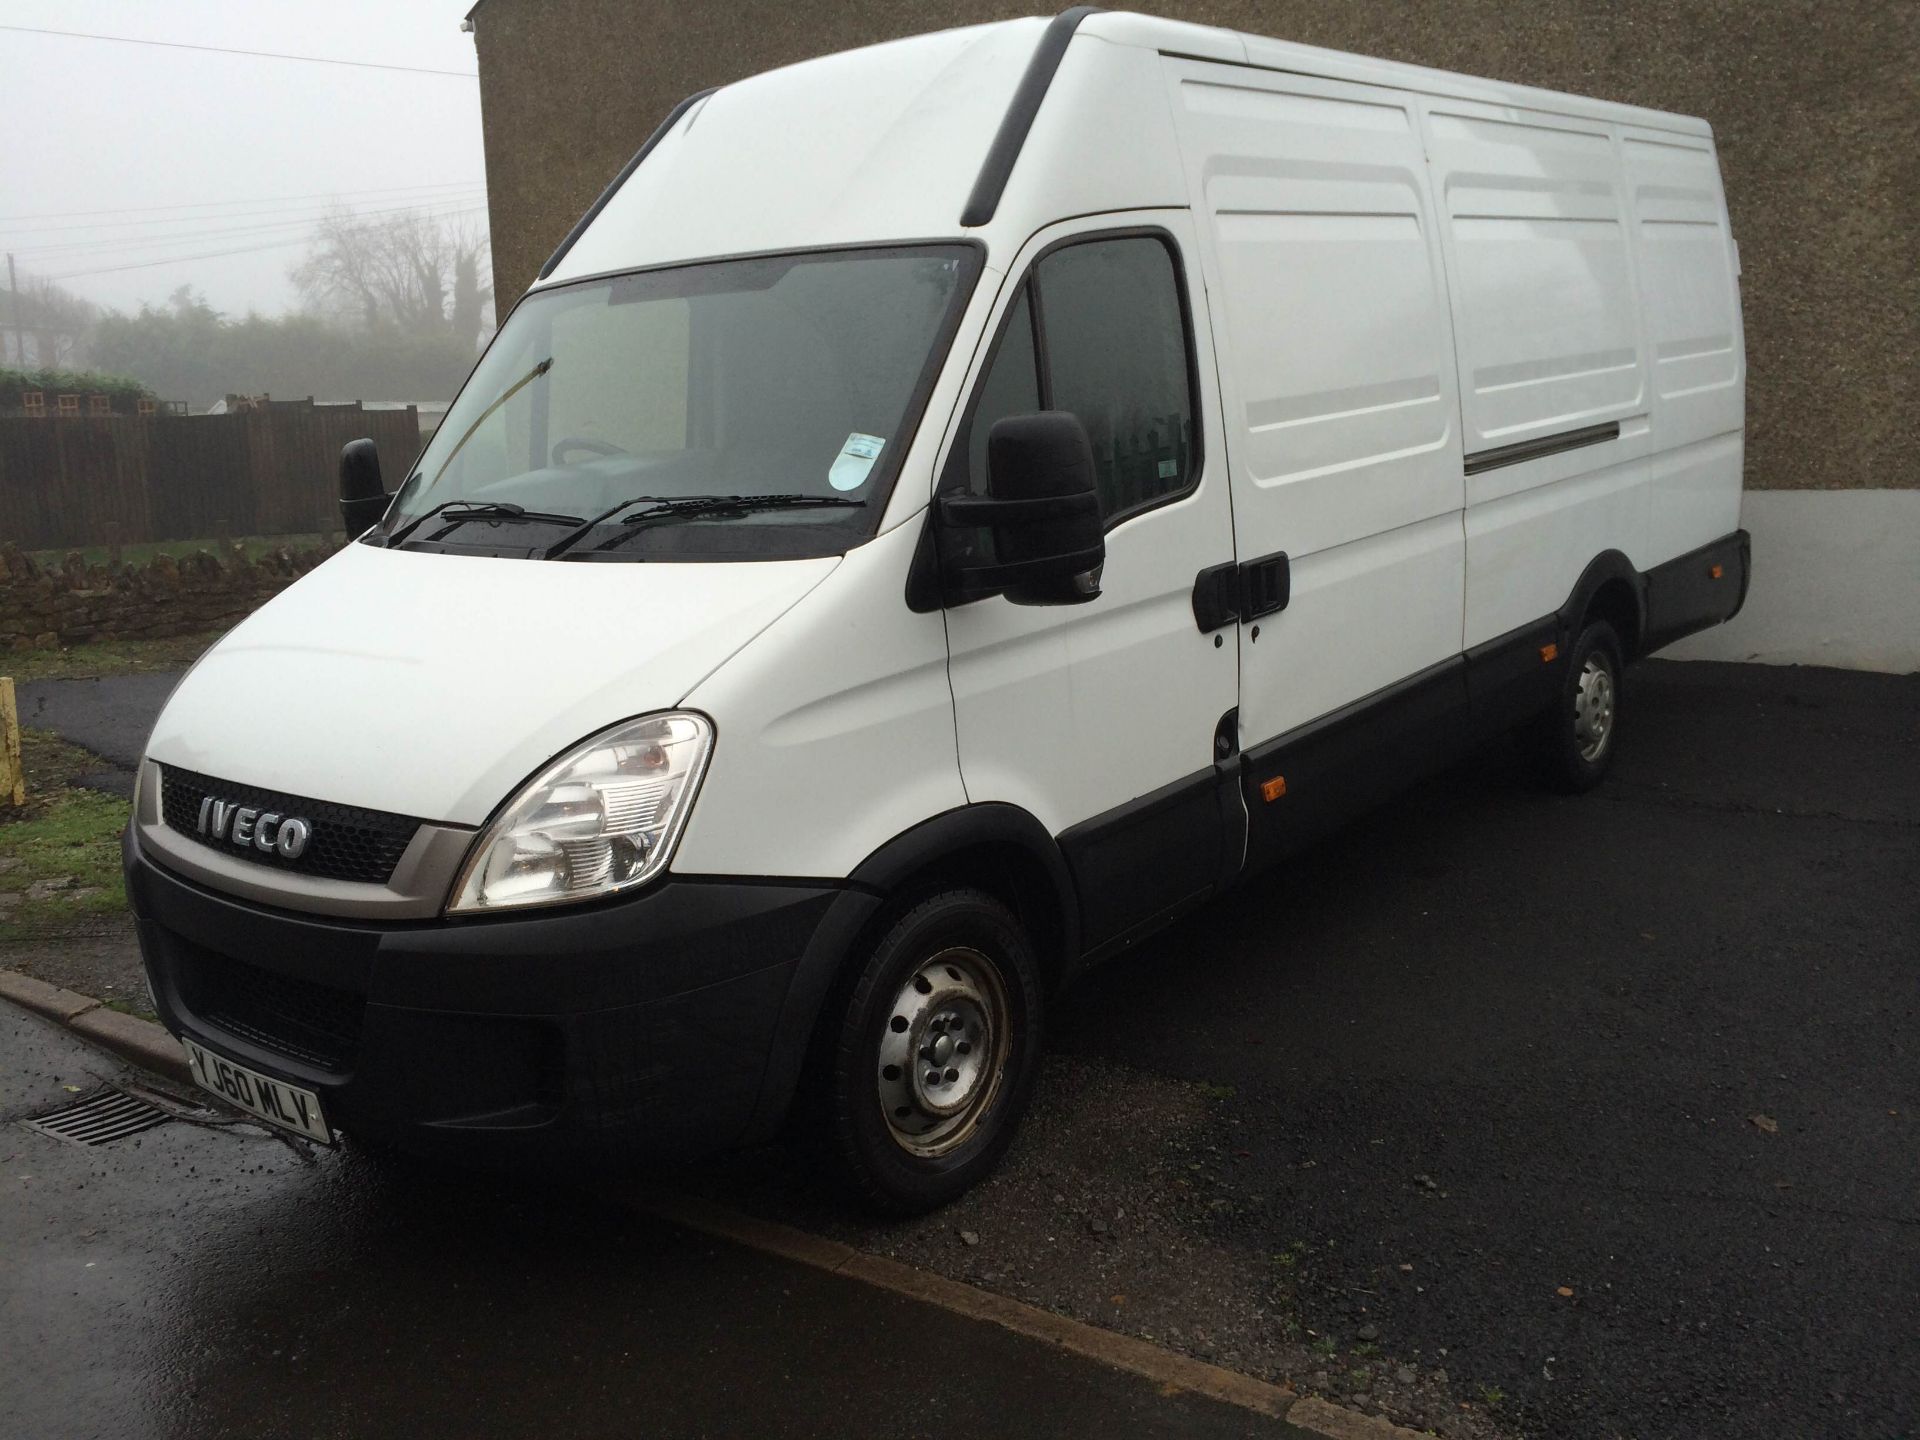 2011/60 REG IVECO DAILY 35S11 LWB EURO 4 NEW SHAPE - Image 4 of 9